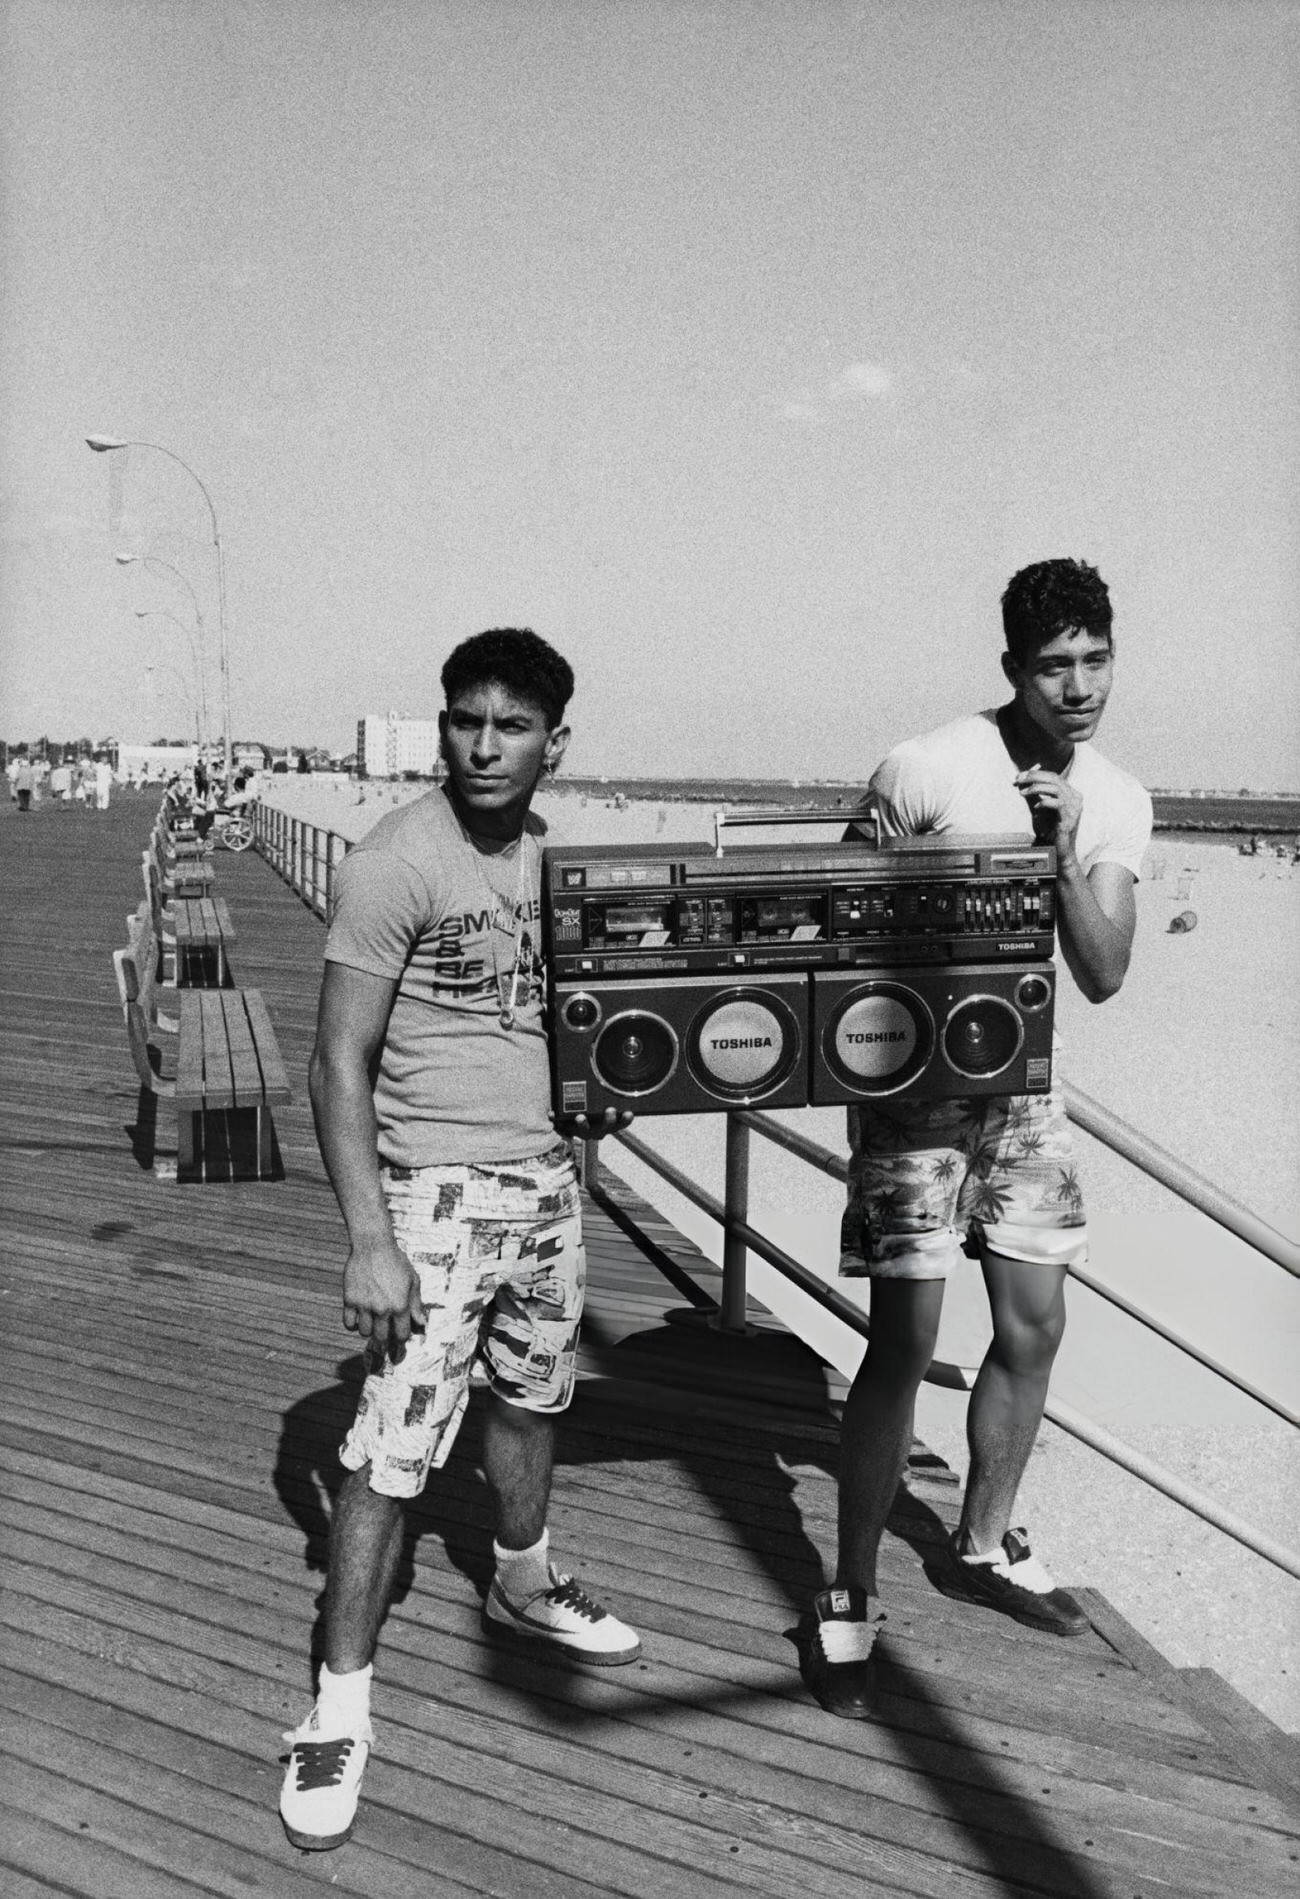 Two Friends Show Their Boombox On The Beach At Coney Island, New York City, 1986.